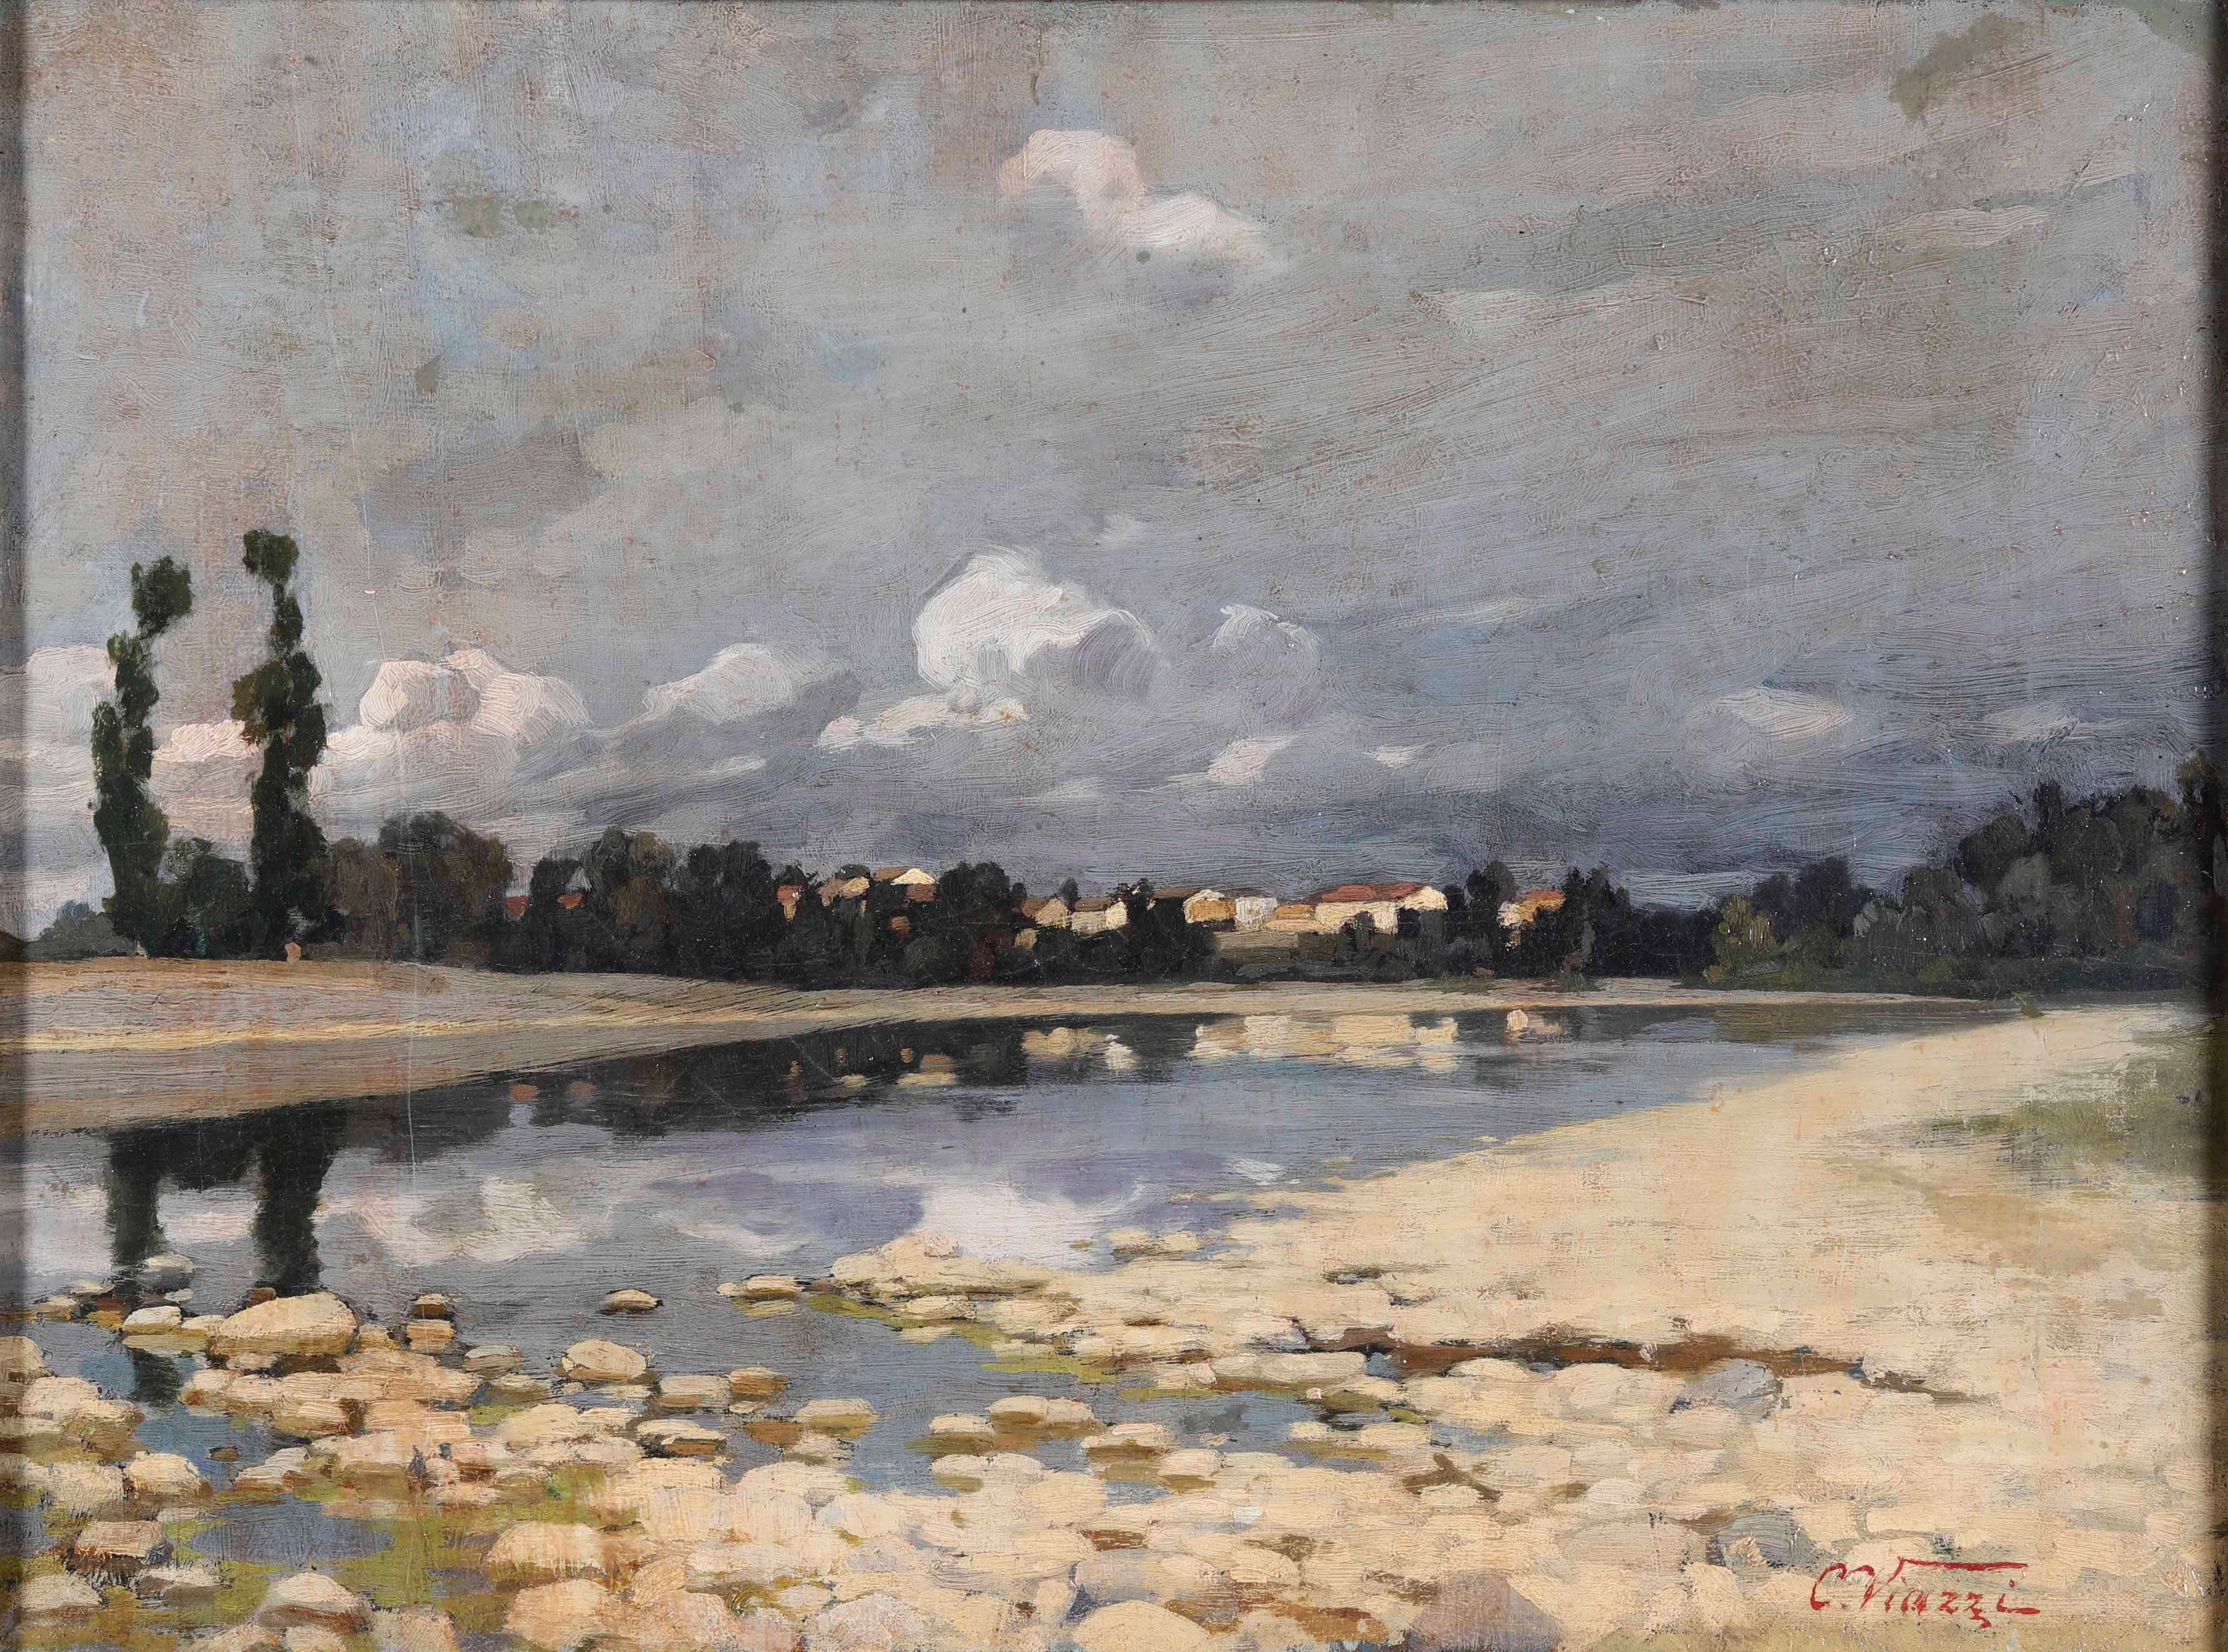 Paese sul fiume by Cesare Viazzi, 1885-1889